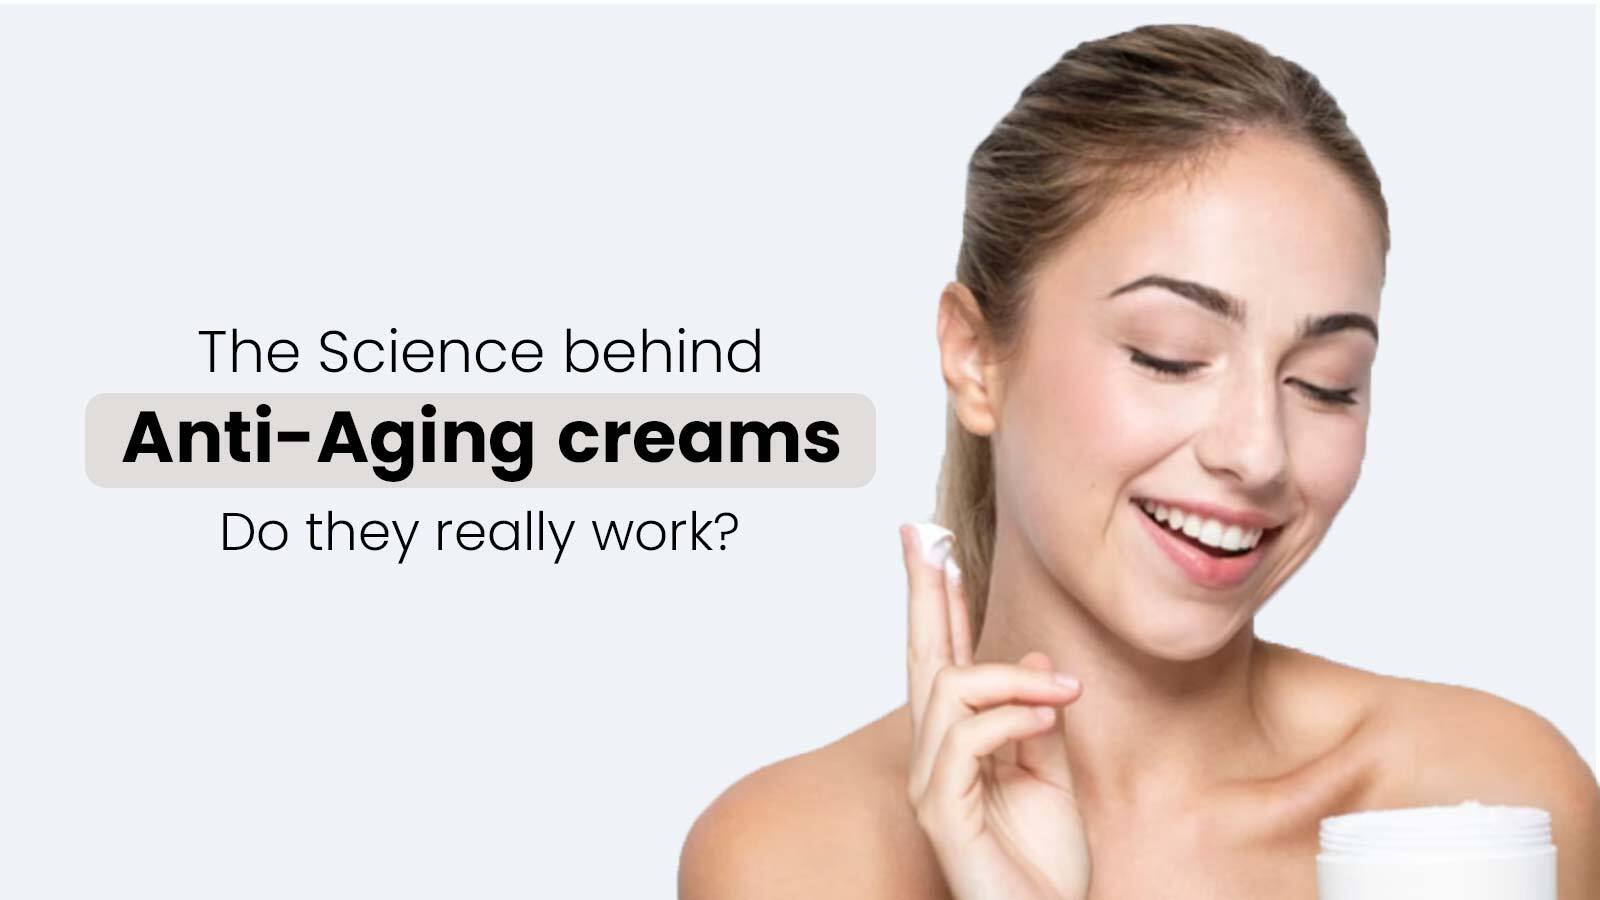 The Science behind Anti-Aging creams Do they really work